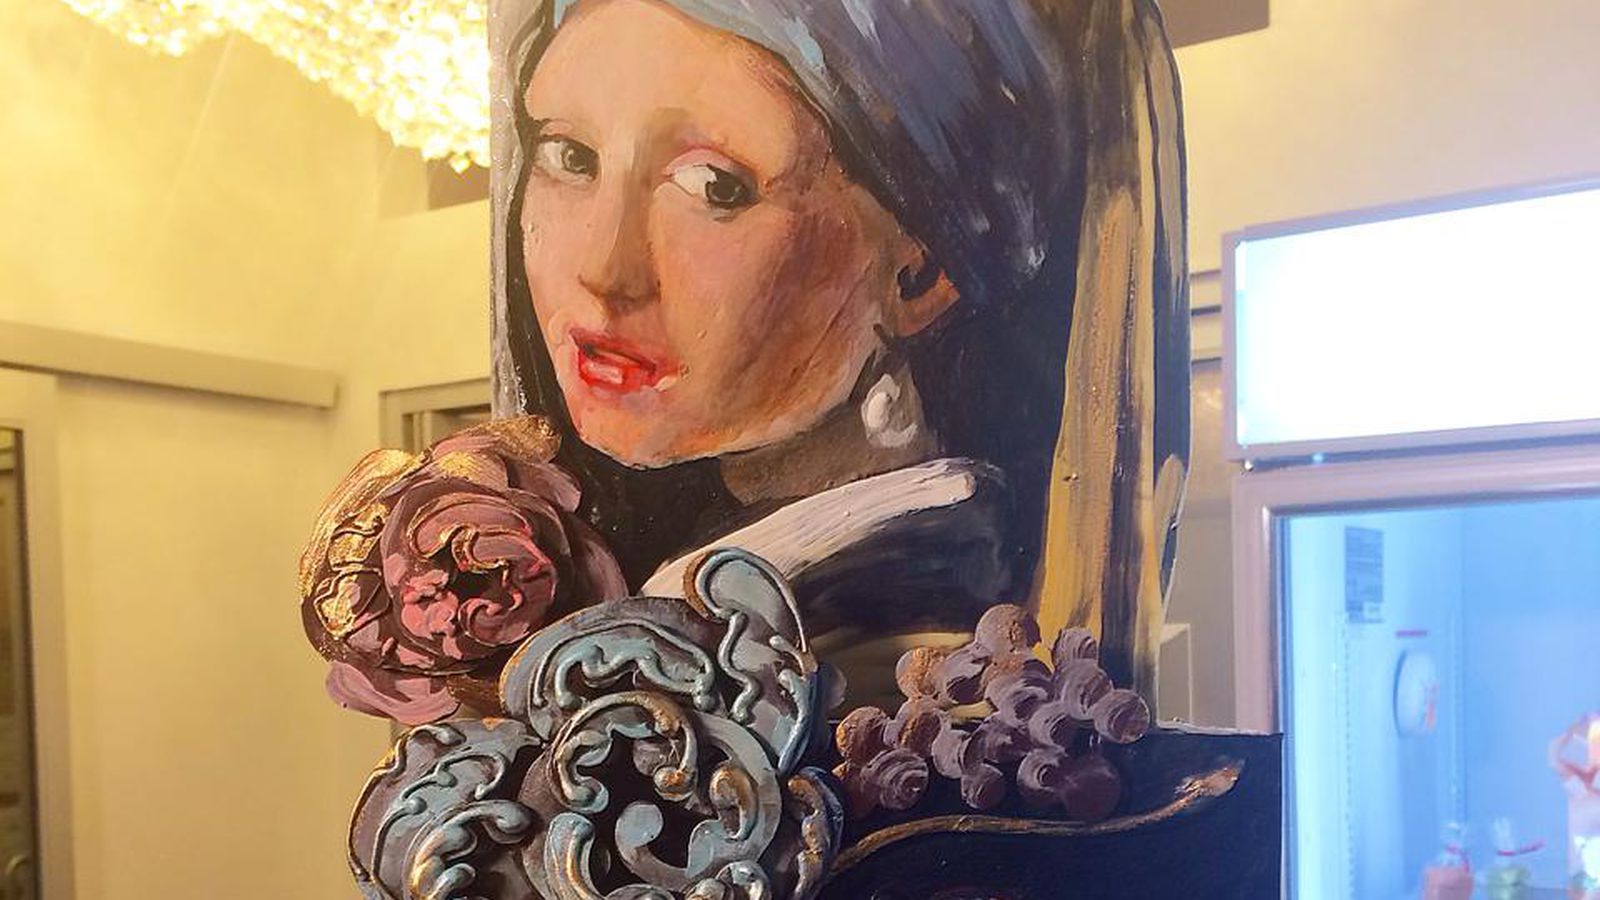 Watch Cake Sculptors Recreate Famous Works of Art in Chocolate